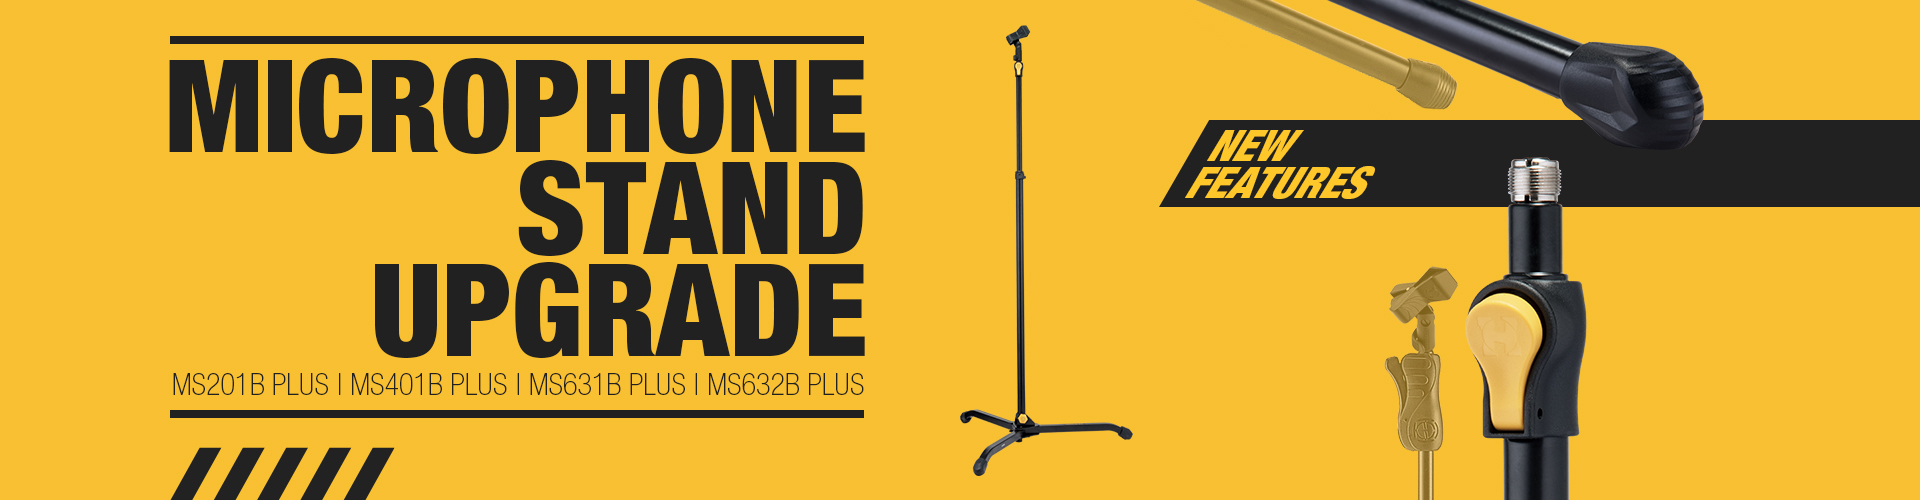 Microphone stand upgrade